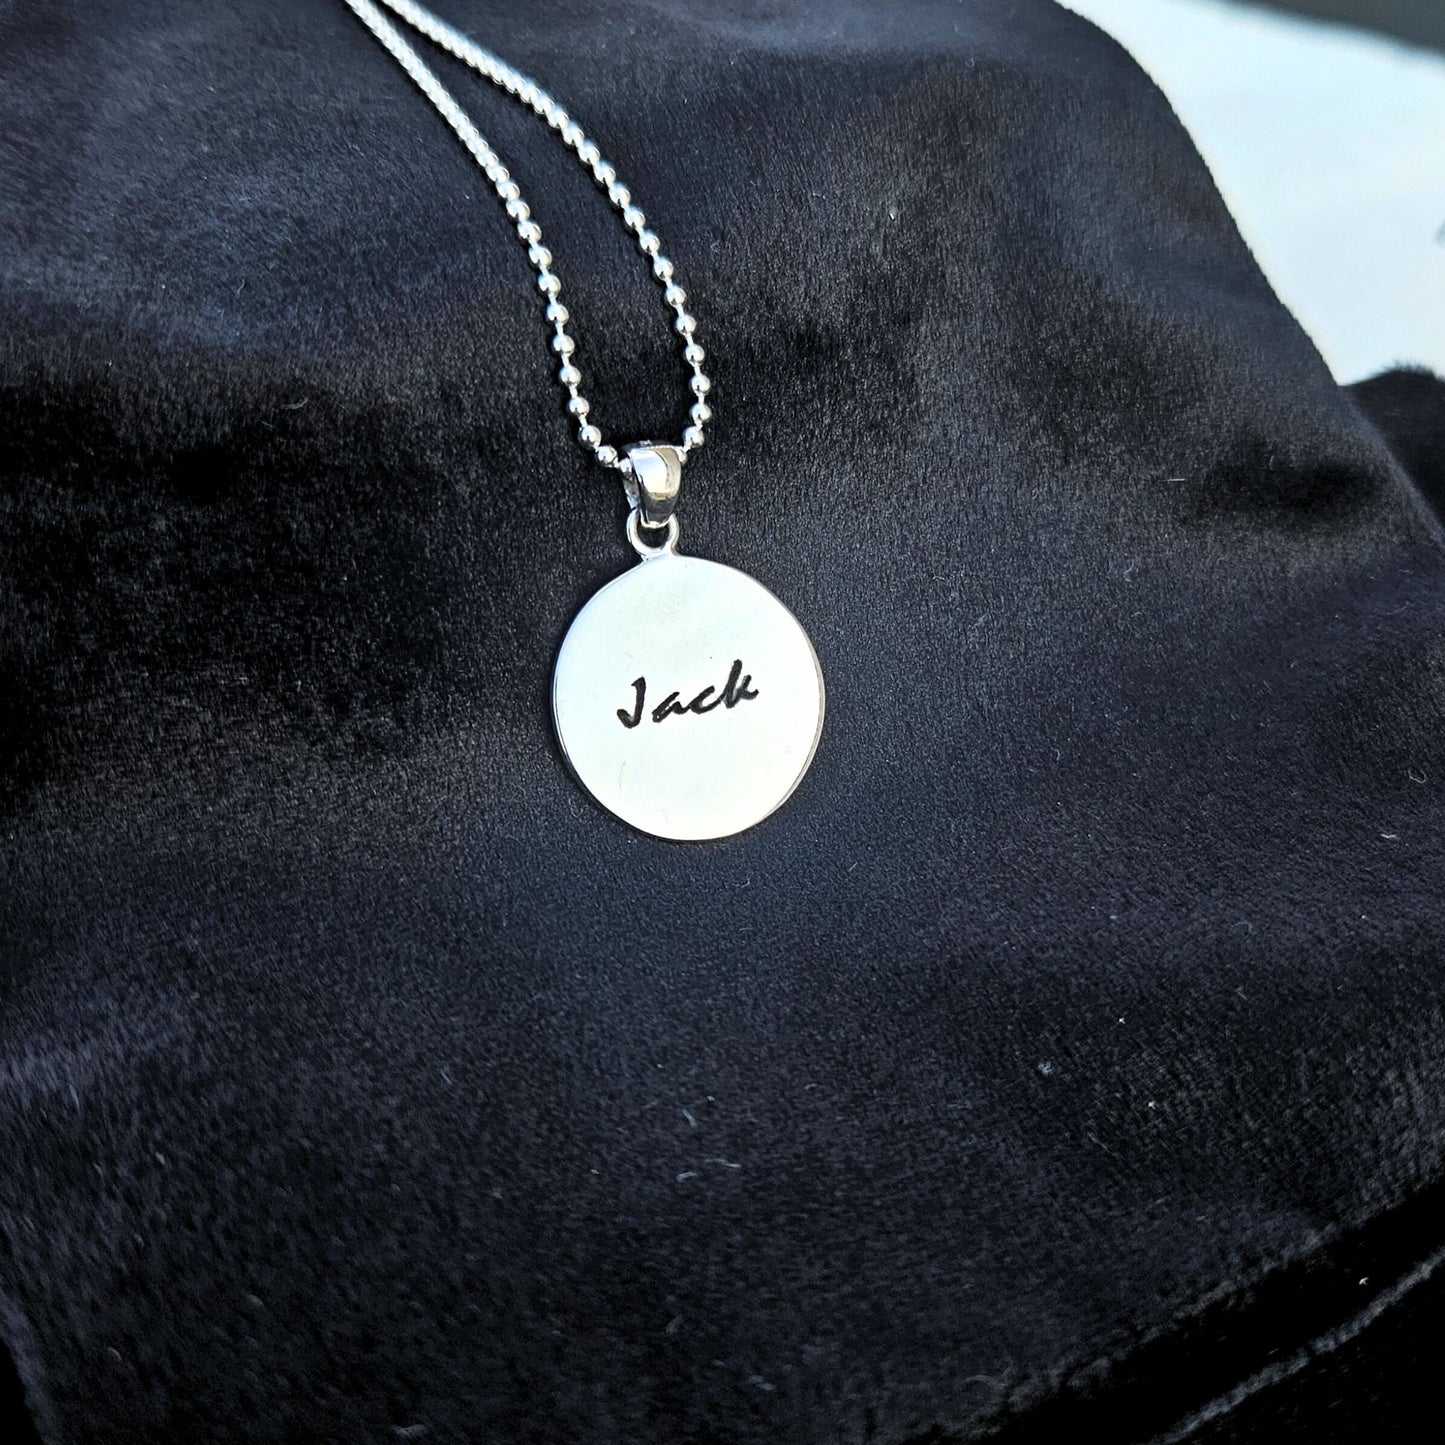 Irosk Eternal Coinage Pendant: A Token of Meaning